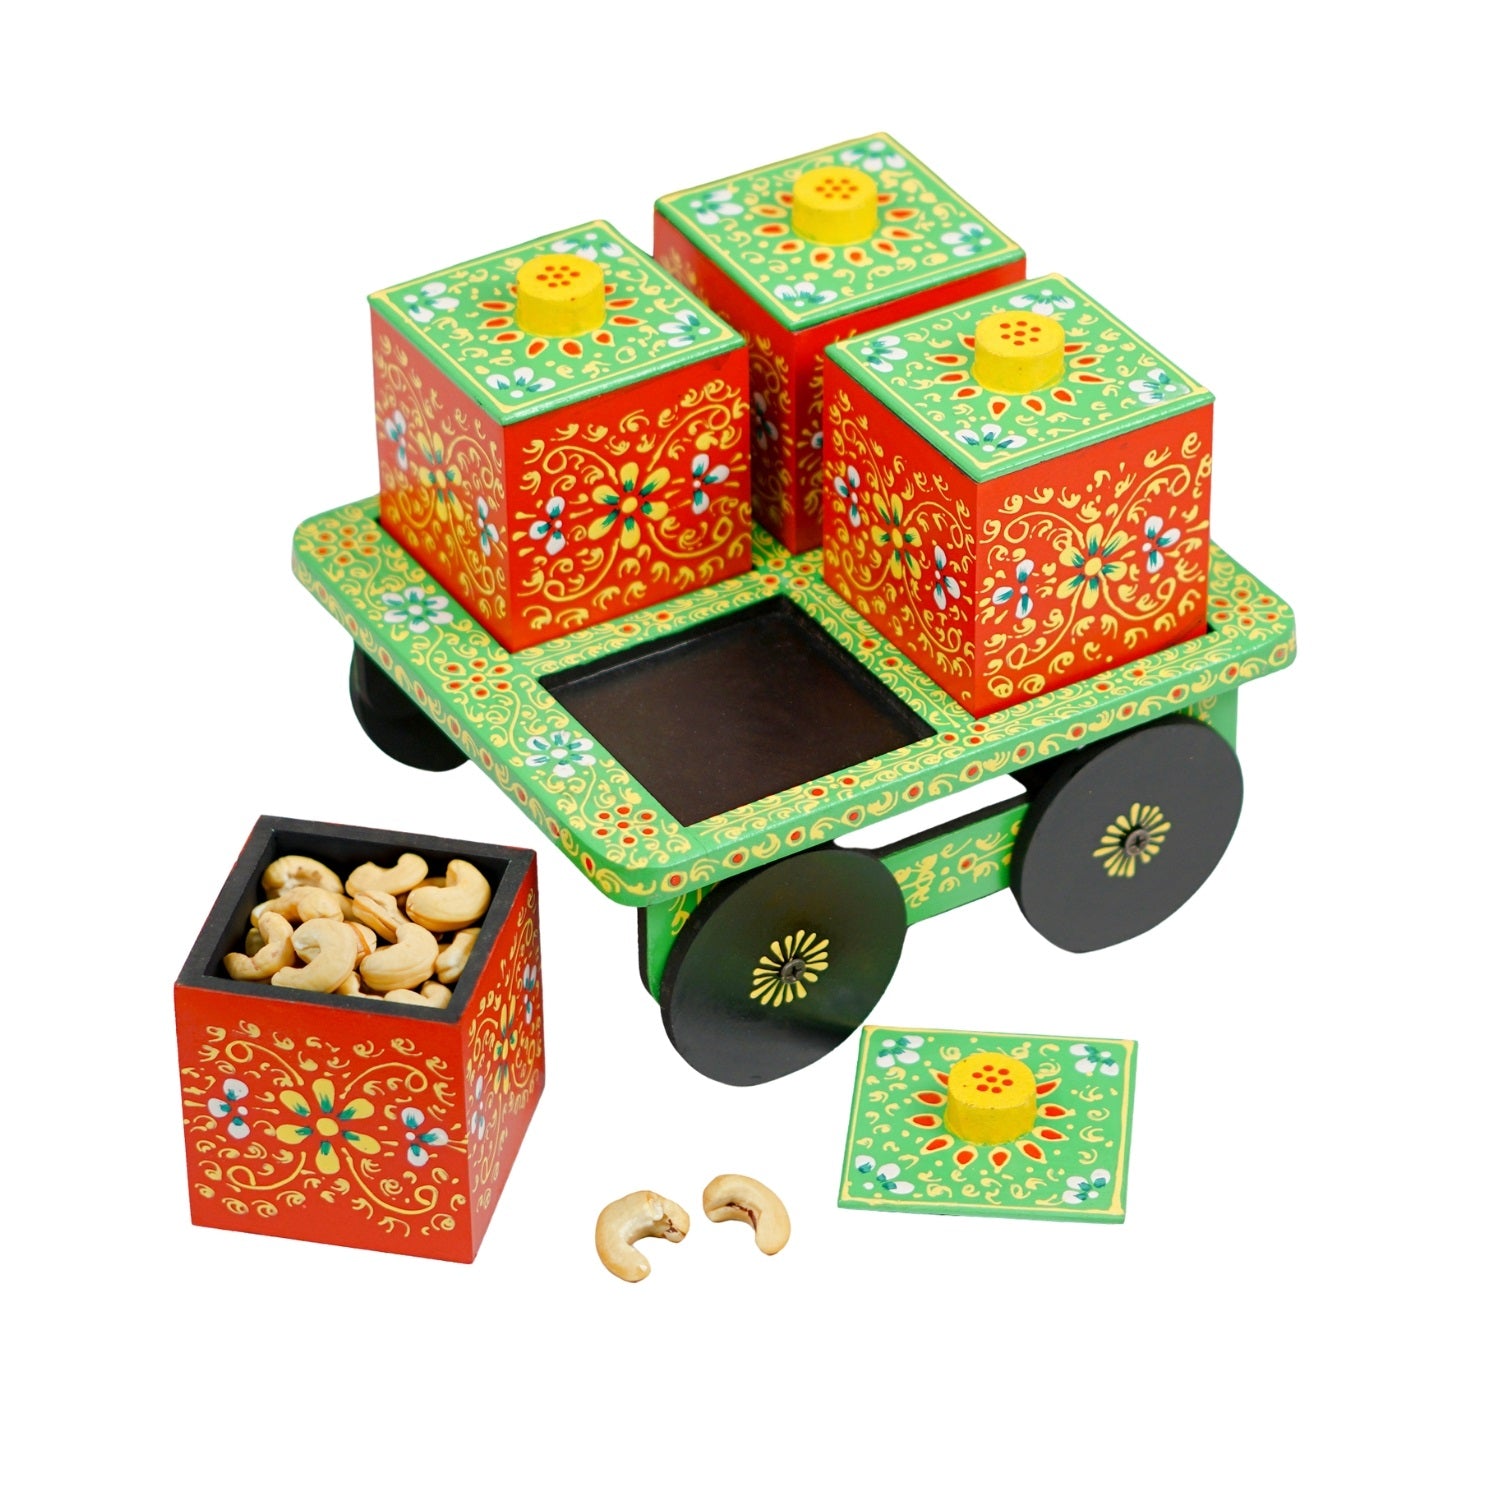 Dry Fruit Box Set of 4 With Trolley Cart - Green